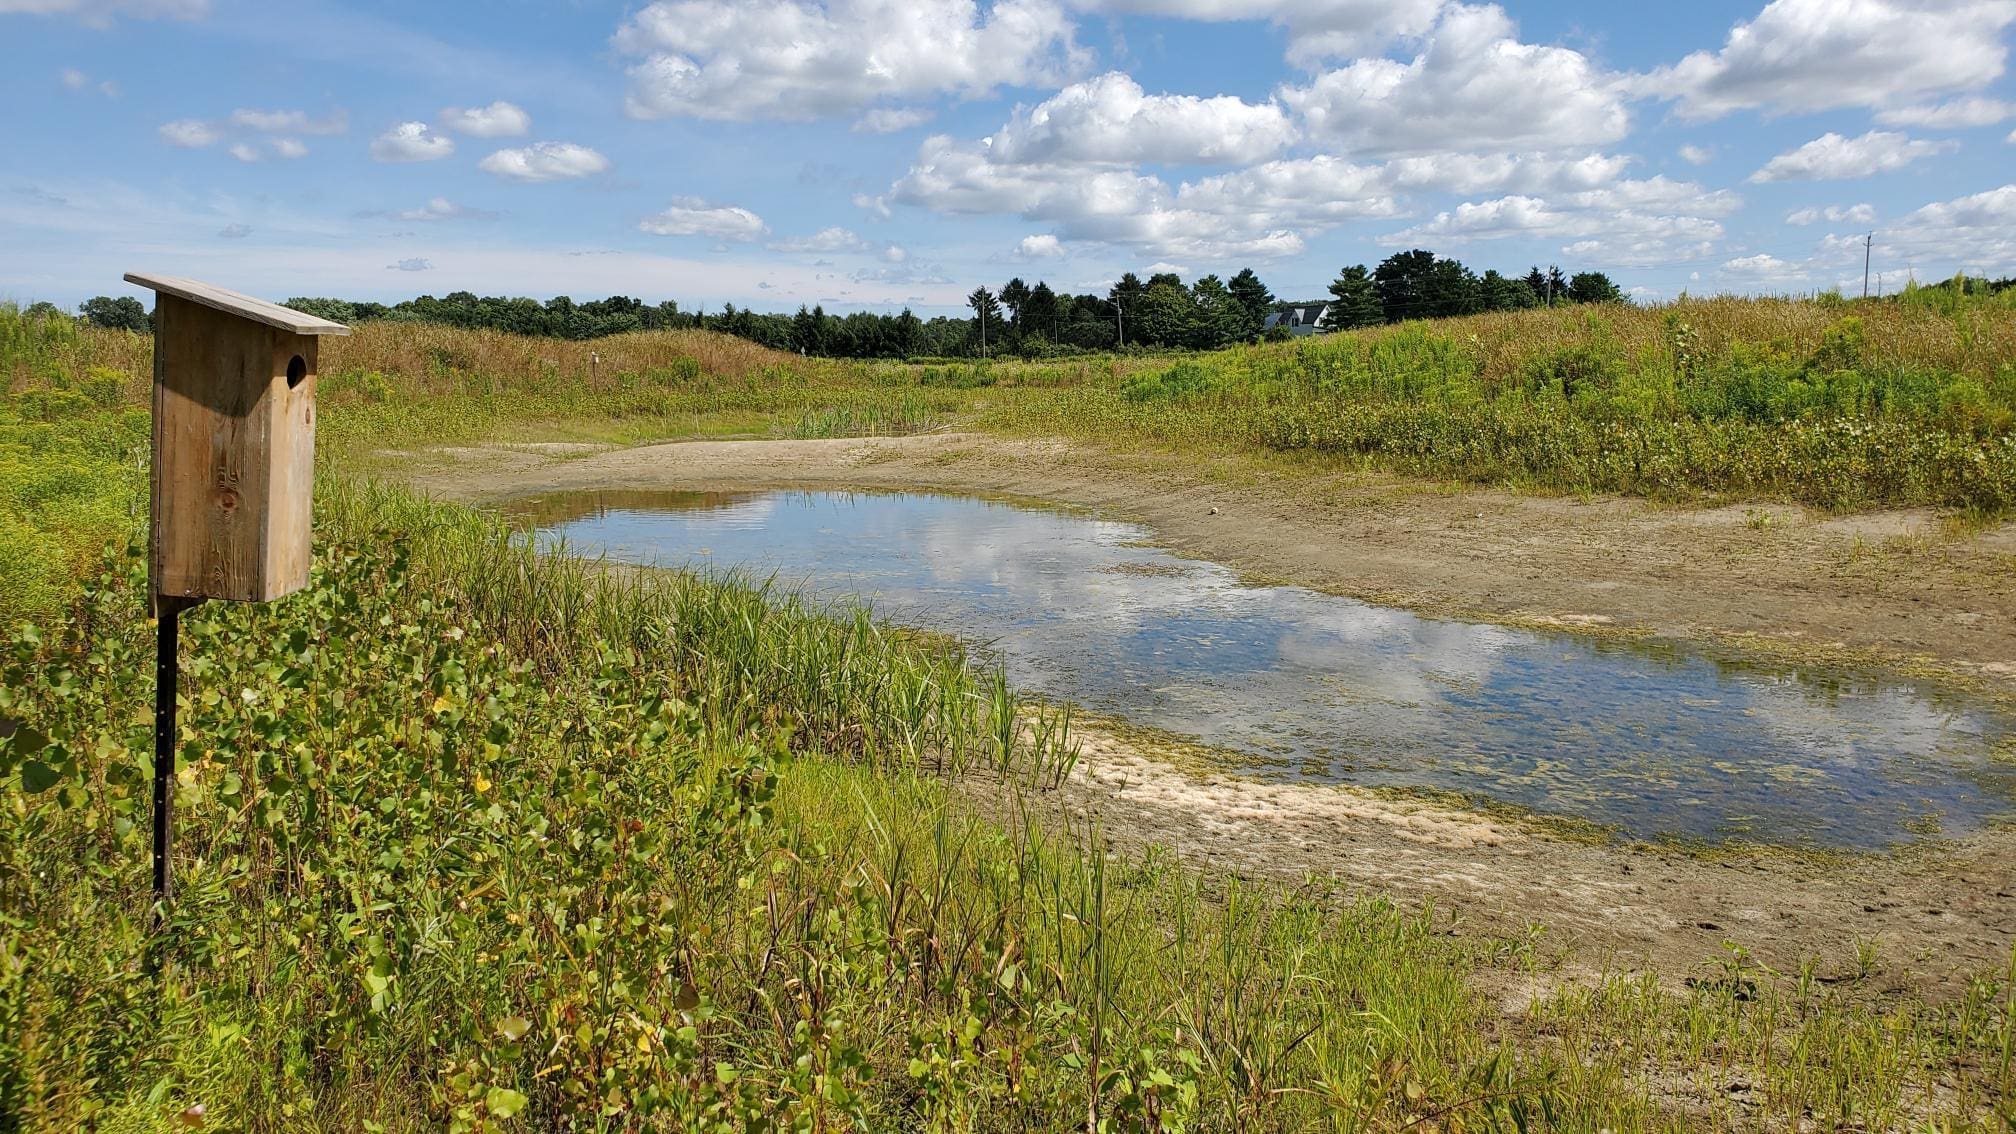 Small wetlands, like this southwestern Ontario edge-of-field habitat, support healthy watersheds with clean water and flood mitigation.